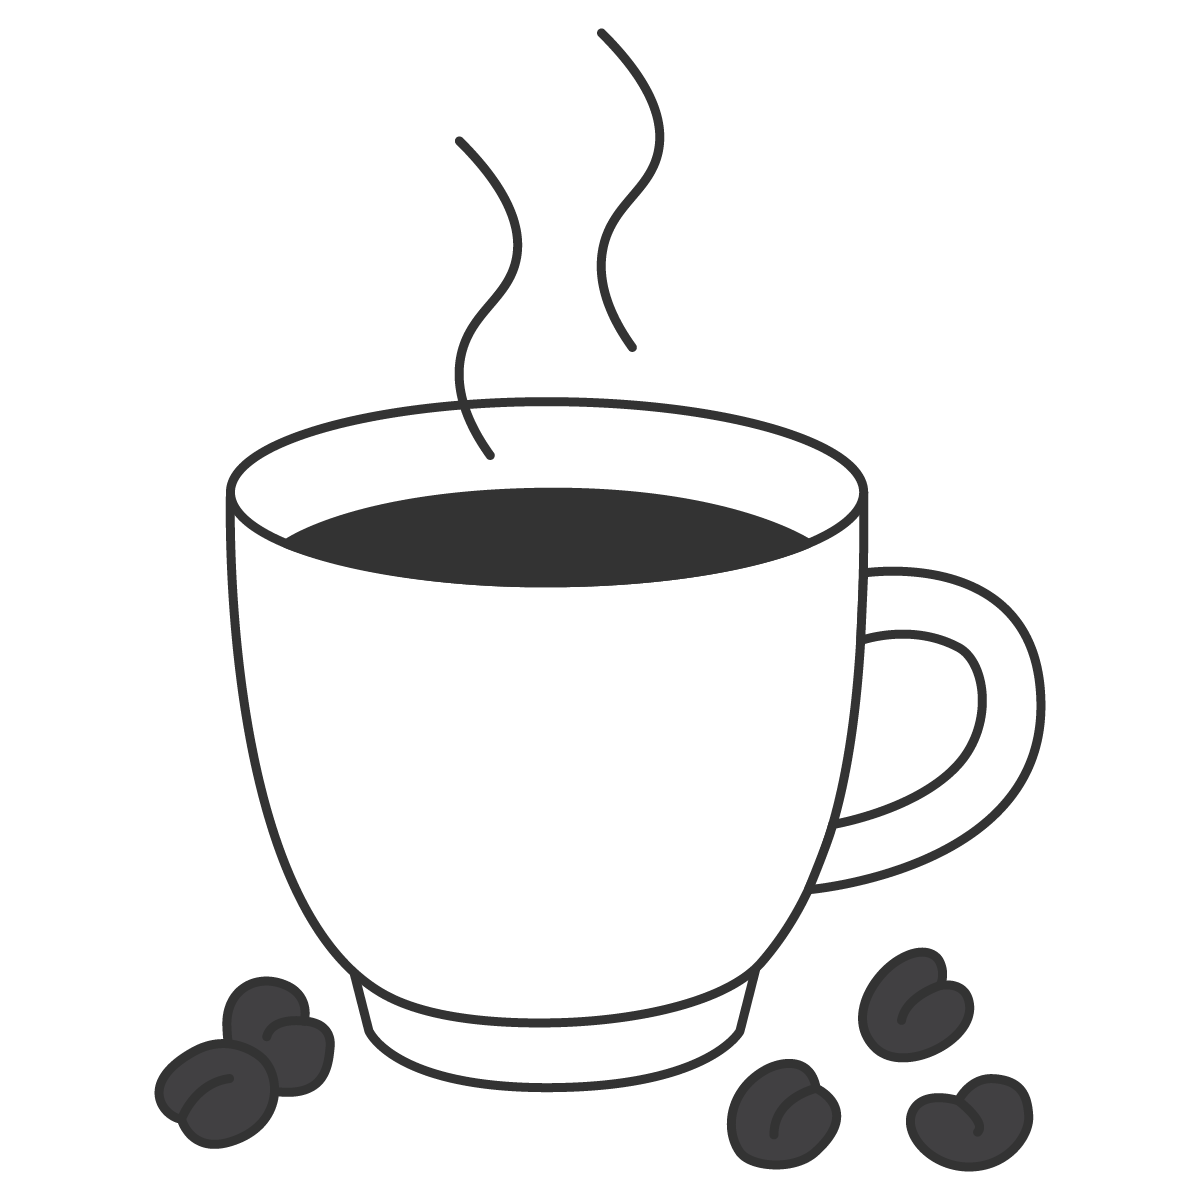 Coffee 咖啡 | NihaoCafe Chinese Learning Platform